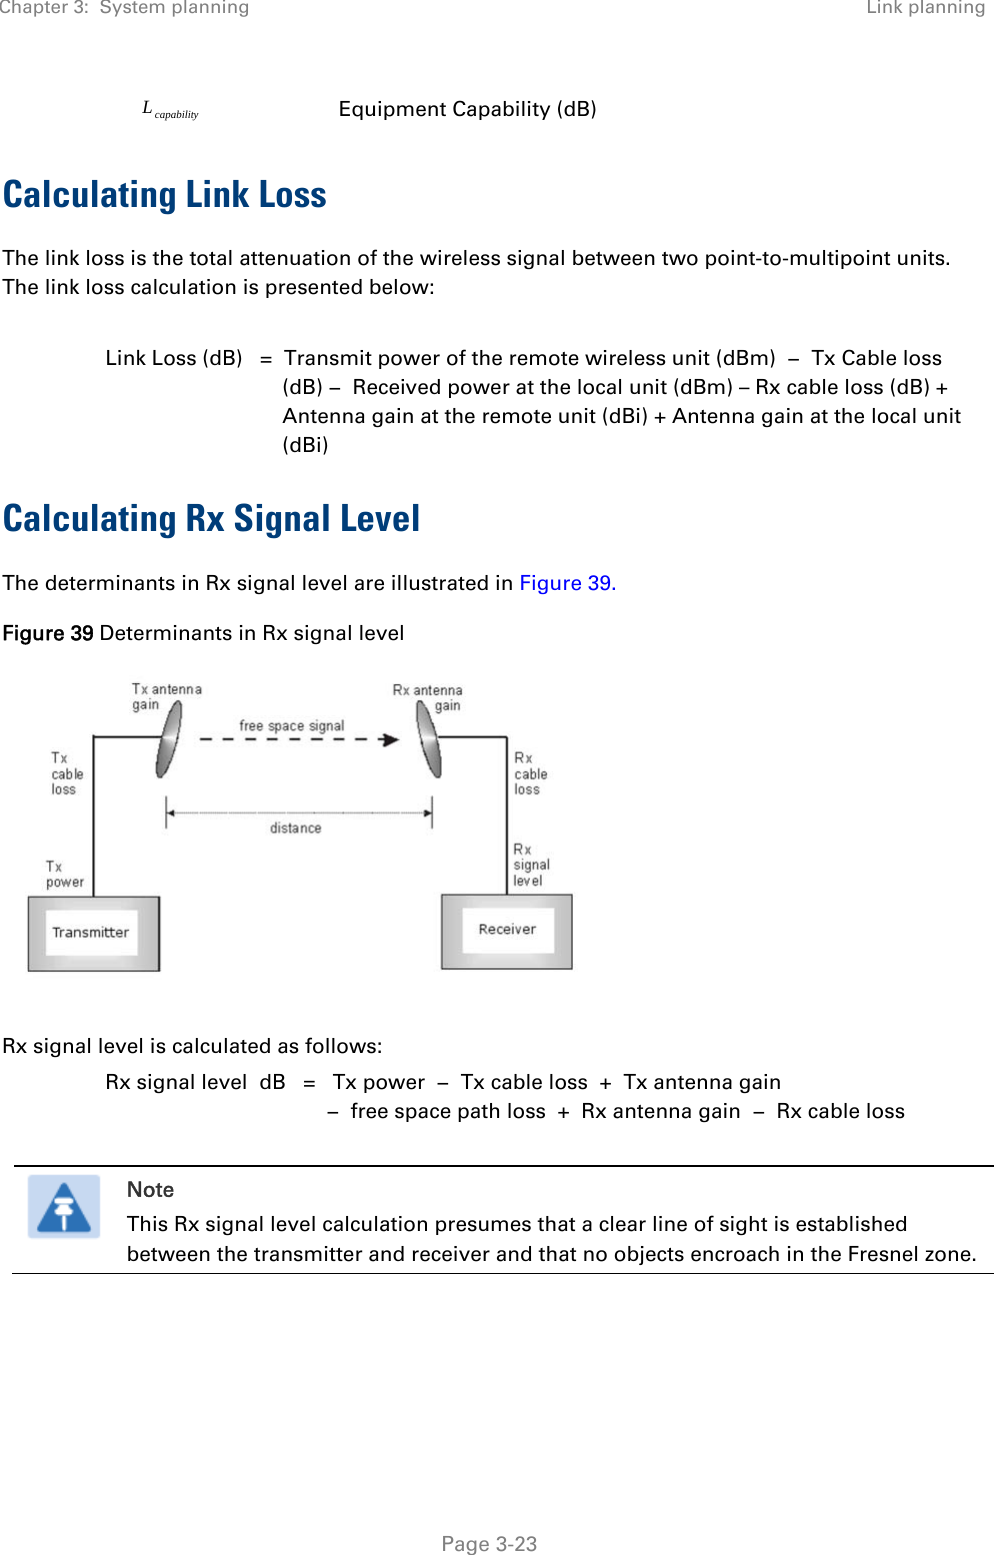 Chapter 3:  System planning  Link planning   Page 3-23 capabilityL Equipment Capability (dB) Calculating Link Loss The link loss is the total attenuation of the wireless signal between two point-to-multipoint units. The link loss calculation is presented below:  Link Loss (dB)   =  Transmit power of the remote wireless unit (dBm)  −  Tx Cable loss (dB) −  Received power at the local unit (dBm) – Rx cable loss (dB) + Antenna gain at the remote unit (dBi) + Antenna gain at the local unit (dBi) Calculating Rx Signal Level The determinants in Rx signal level are illustrated in Figure 39. Figure 39 Determinants in Rx signal level   Rx signal level is calculated as follows: Rx signal level  dB   =   Tx power  −  Tx cable loss  +  Tx antenna gain   −  free space path loss  +  Rx antenna gain  −  Rx cable loss   Note This Rx signal level calculation presumes that a clear line of sight is established between the transmitter and receiver and that no objects encroach in the Fresnel zone.  